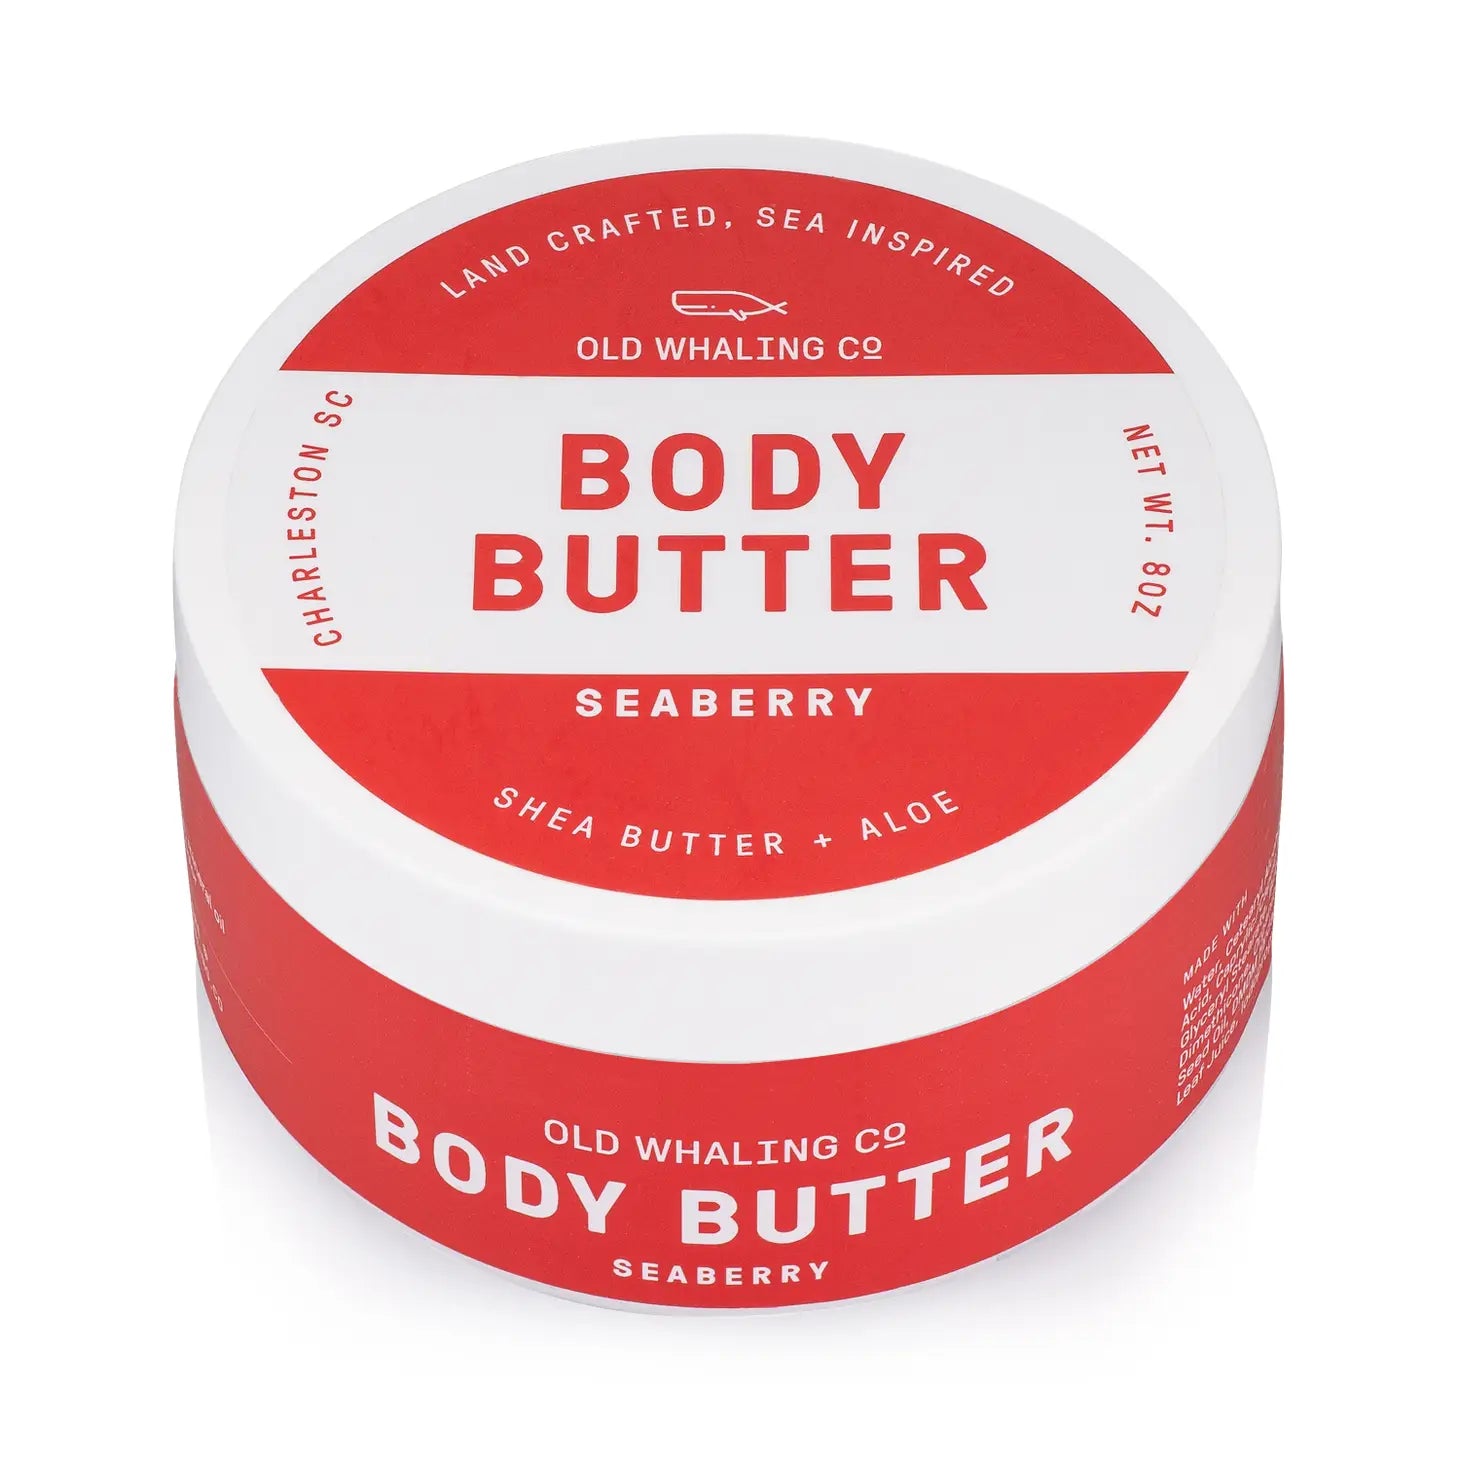 Seaberry Body Butter 8oz